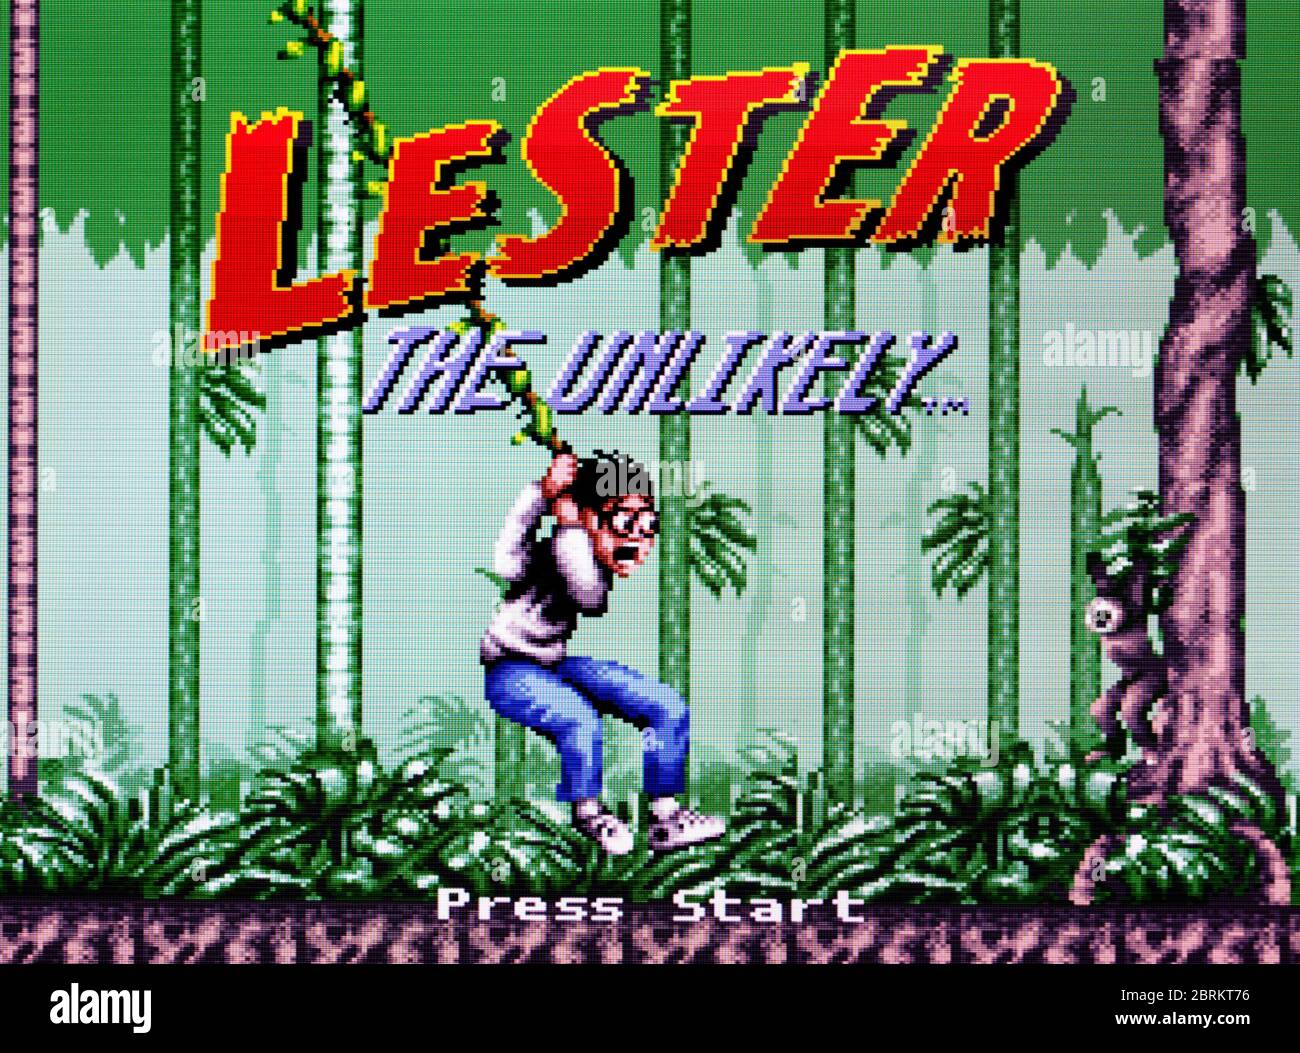 Lester The Unlikely - SNES Super Nintendo  - Editorial use only Stock Photo